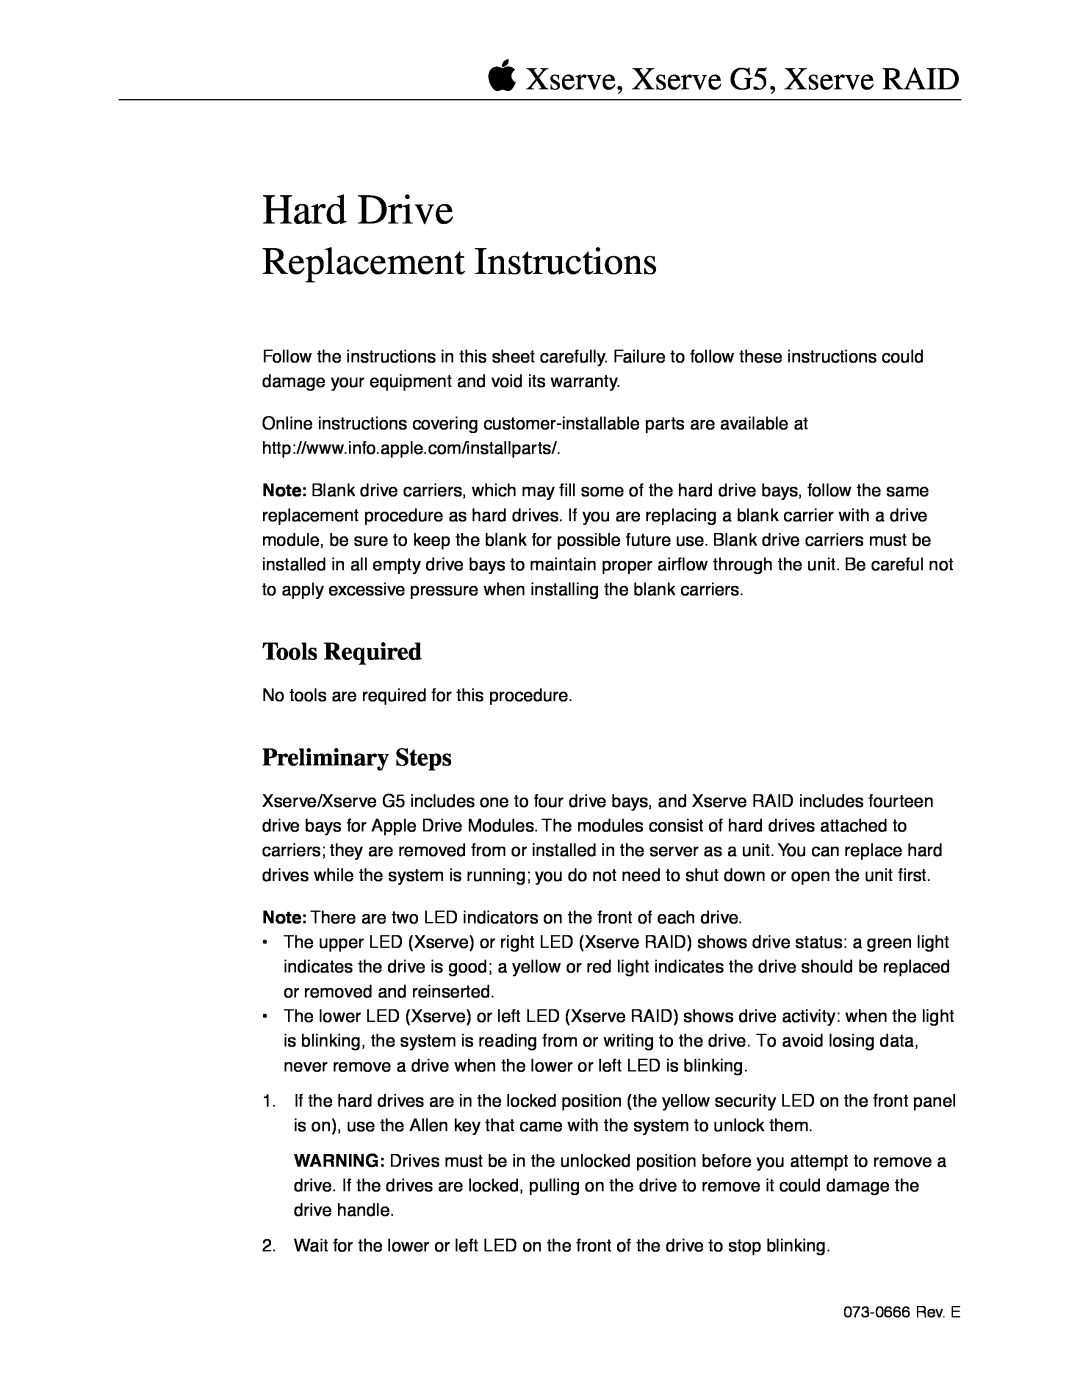 Apple XSERVE RAID warranty Tools Required, Preliminary Steps, Hard Drive, Replacement Instructions 